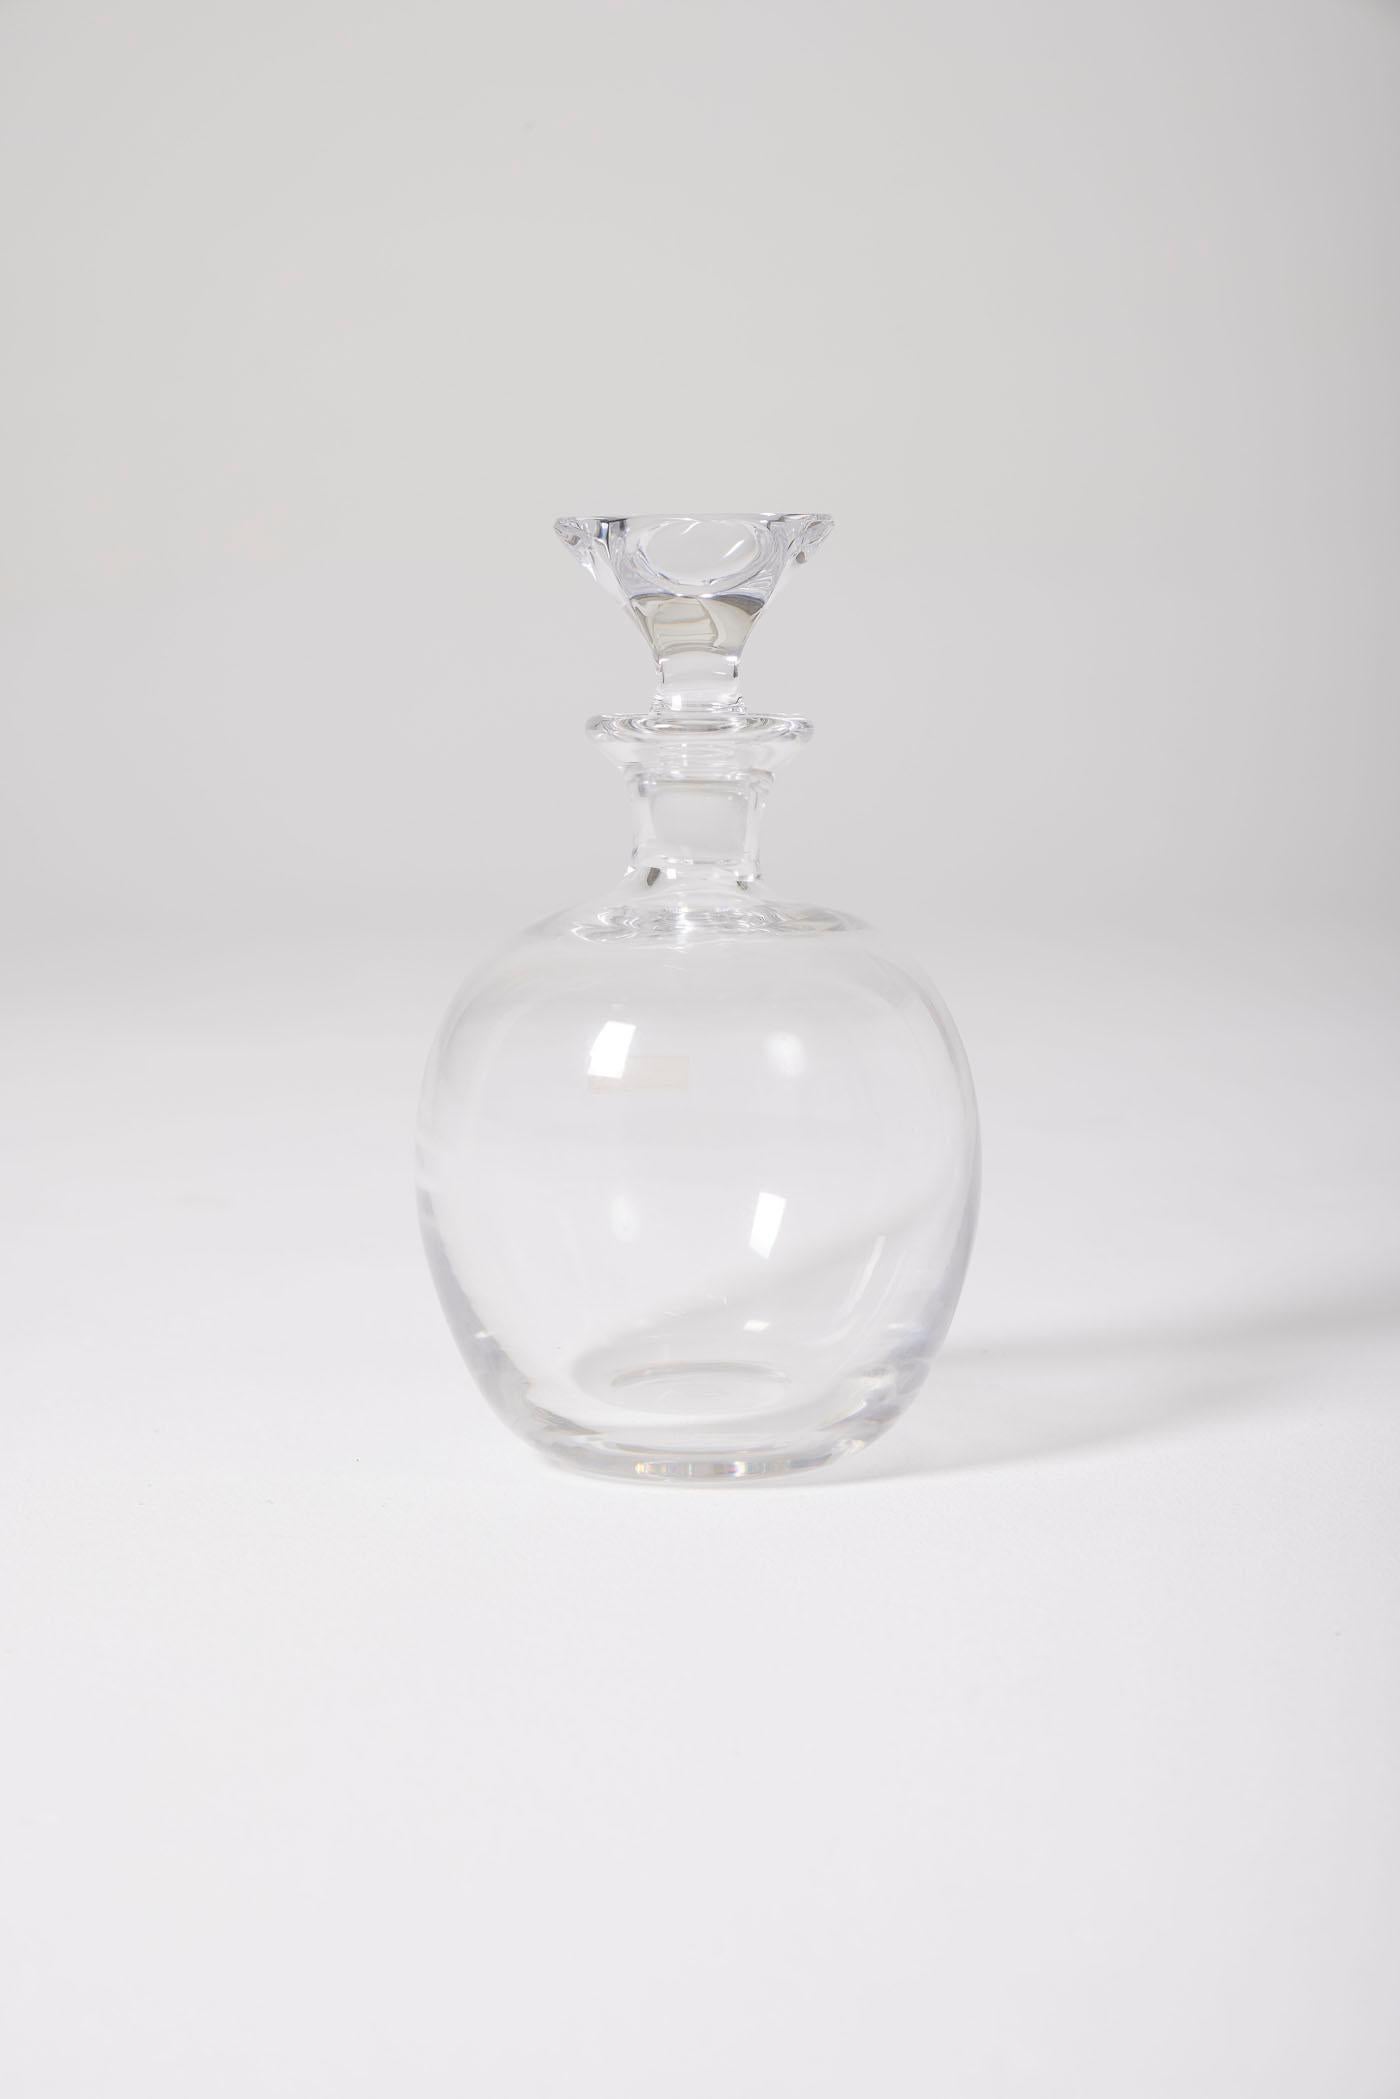 Spherical crystal decanter signed by Saint Louis, complete with its crystal stopper. In very good condition.
LP2165